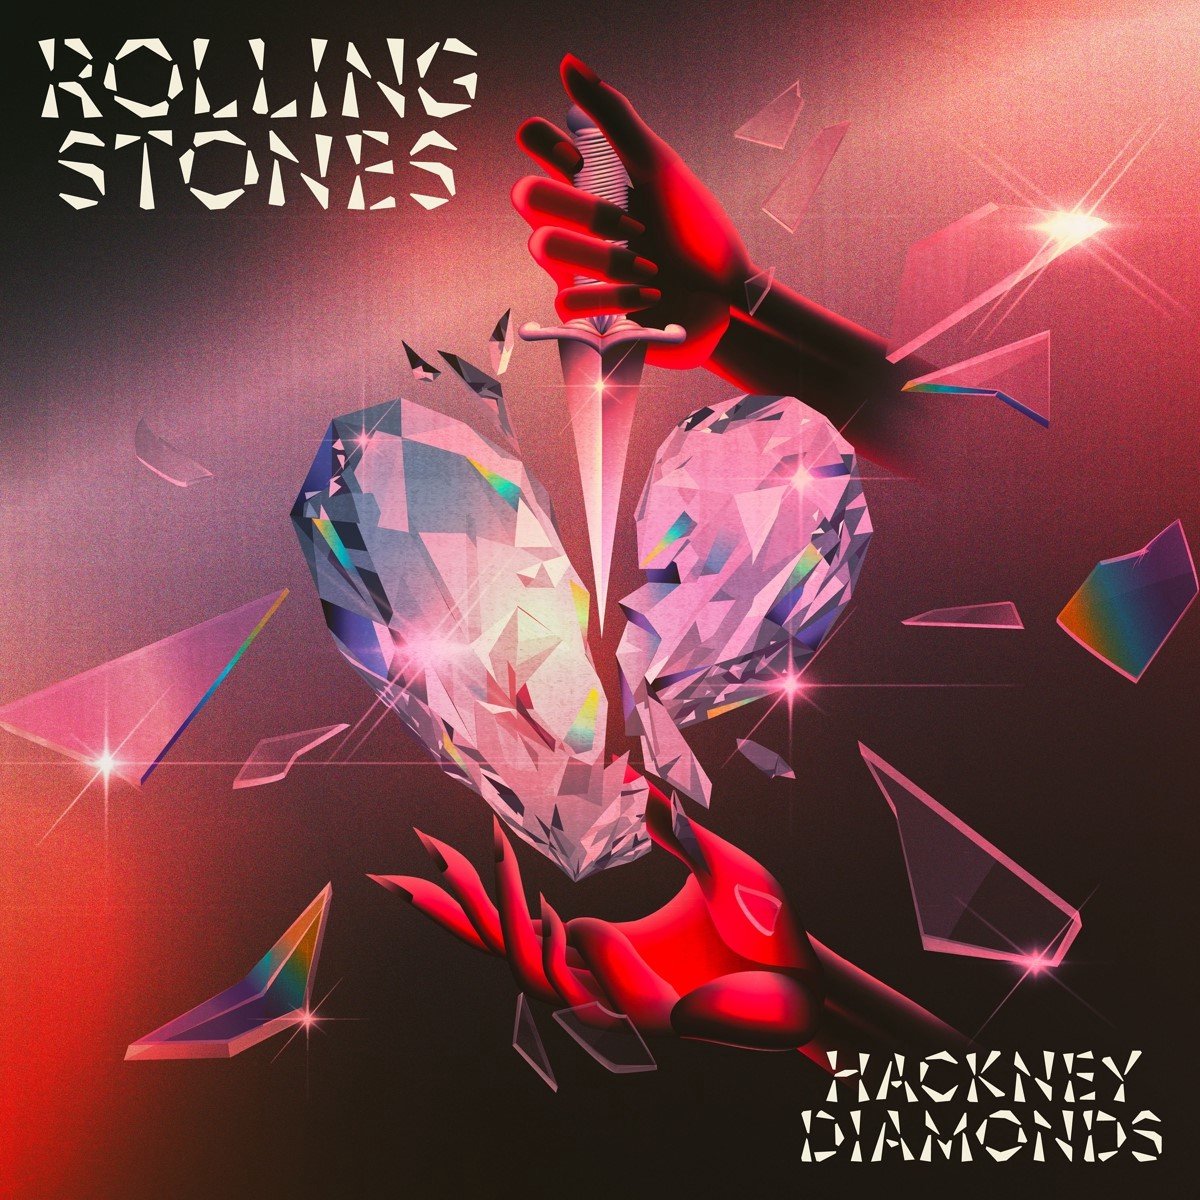 The Rolling Stones - Hackney Diamonds (CD | Blu-ray Video) (Limited Edition) - The Rolling Stones